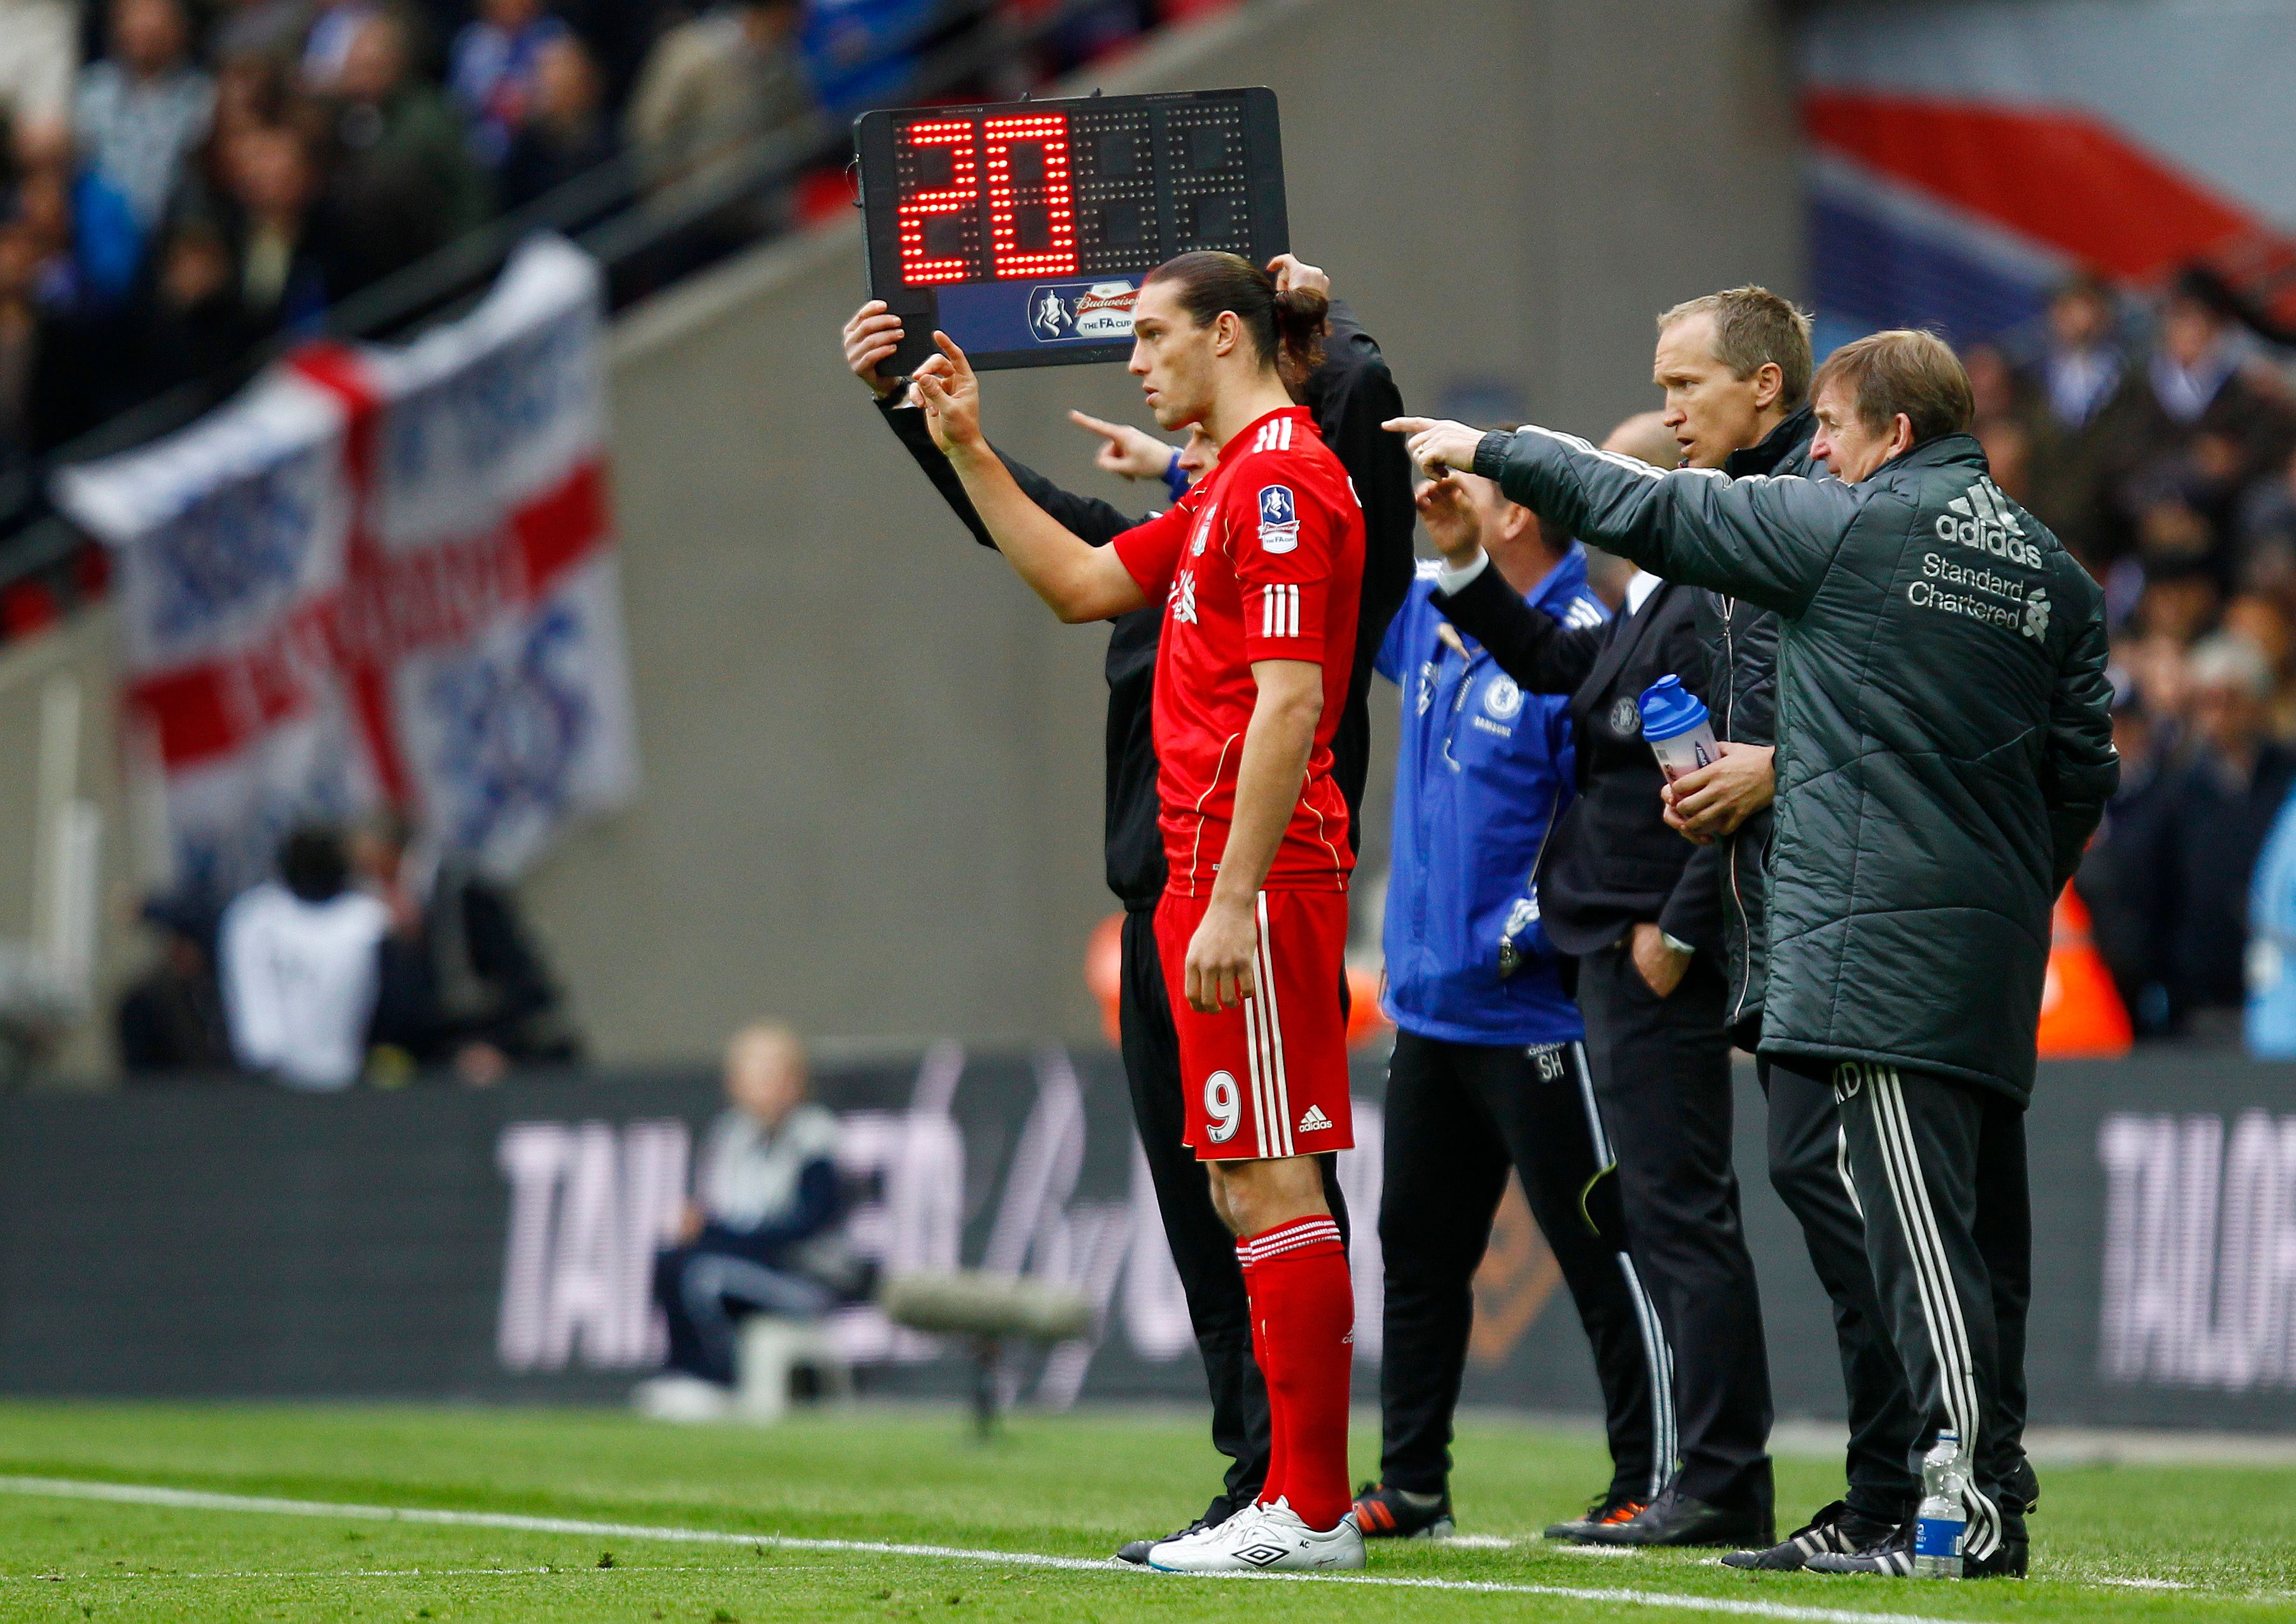 Liverpool's Andy Carroll is subbed on in the 2012 FA Cup final